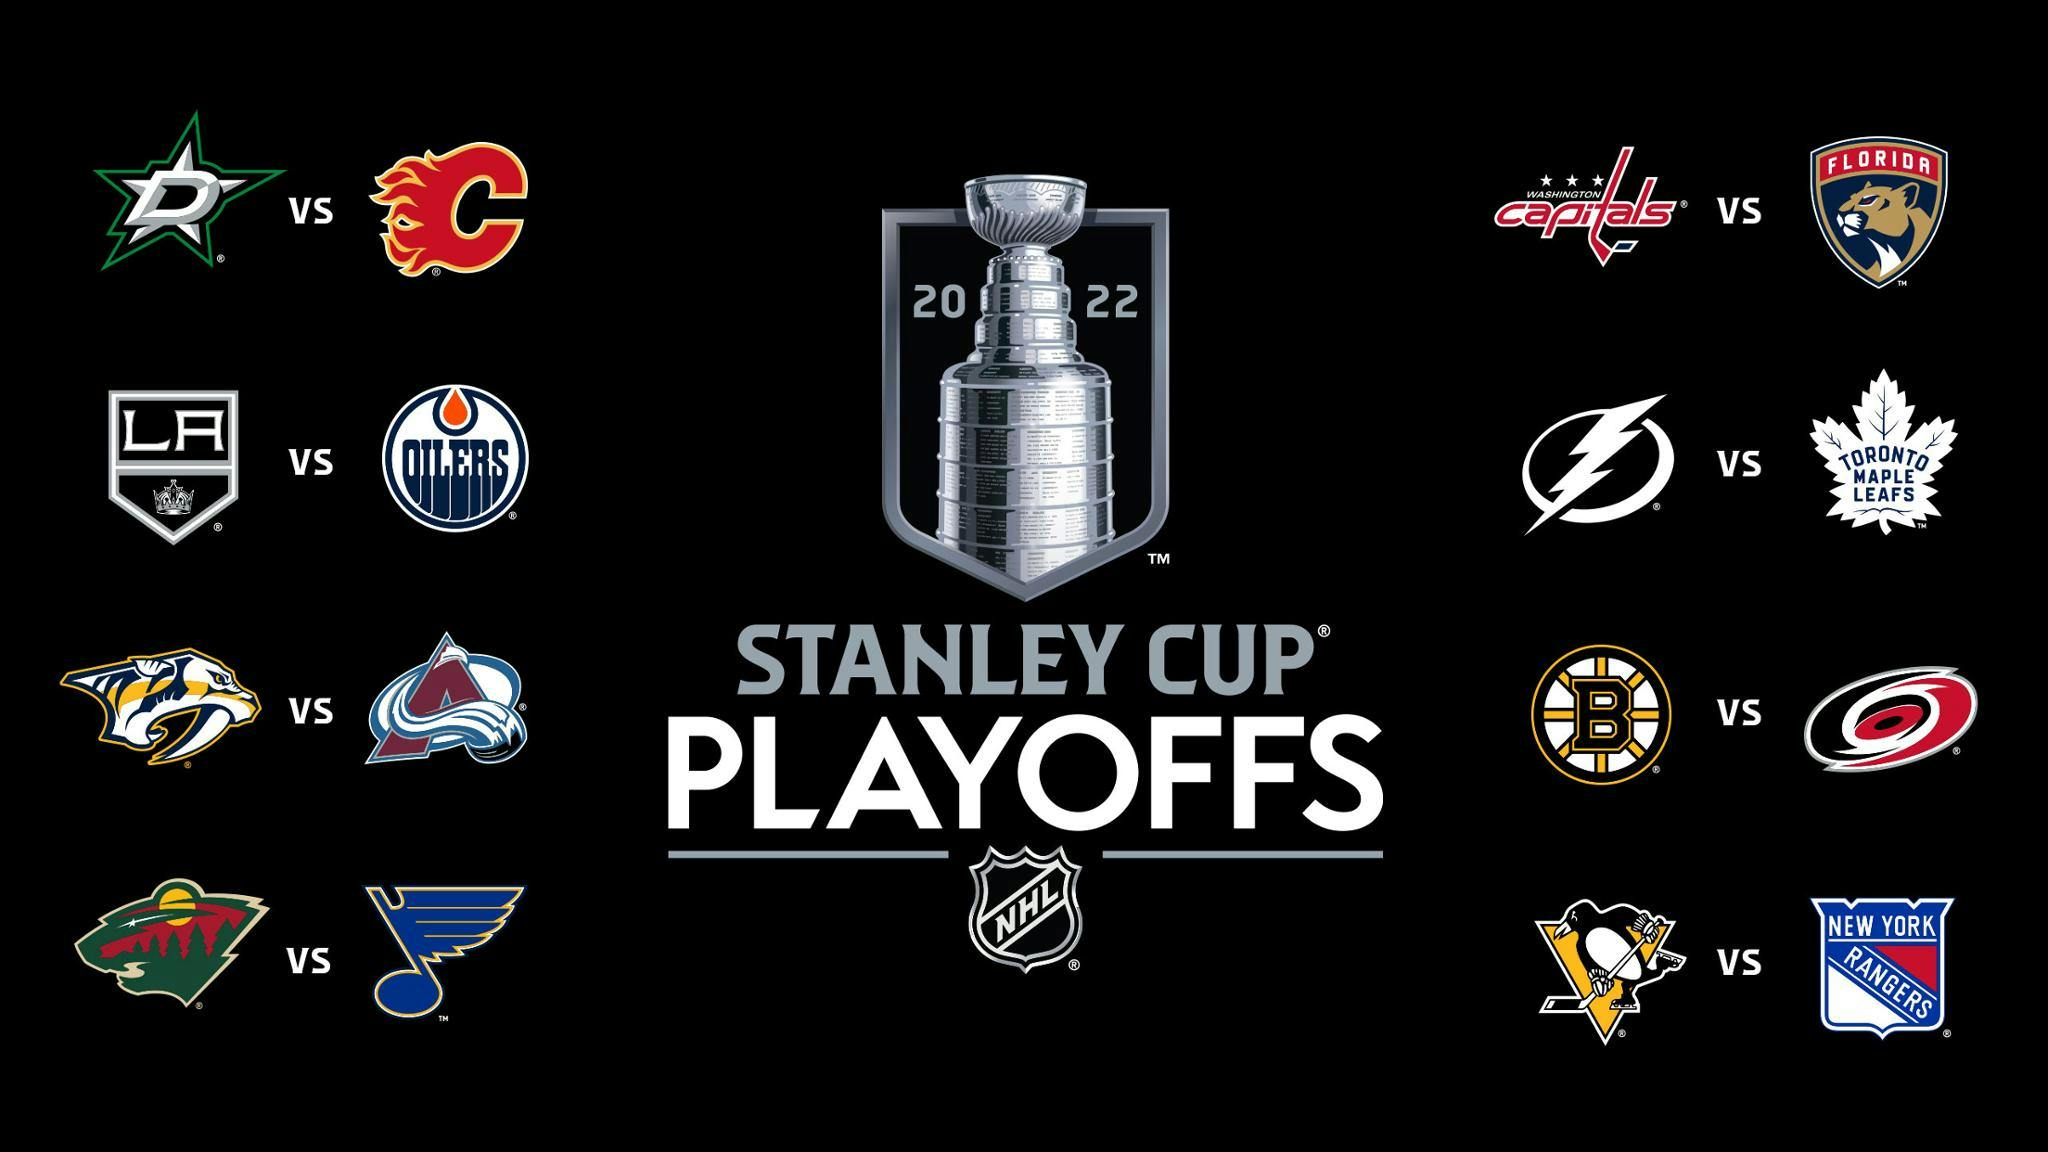 NHL playoff bracket 2022: Who will the St. Louis Blues play in the